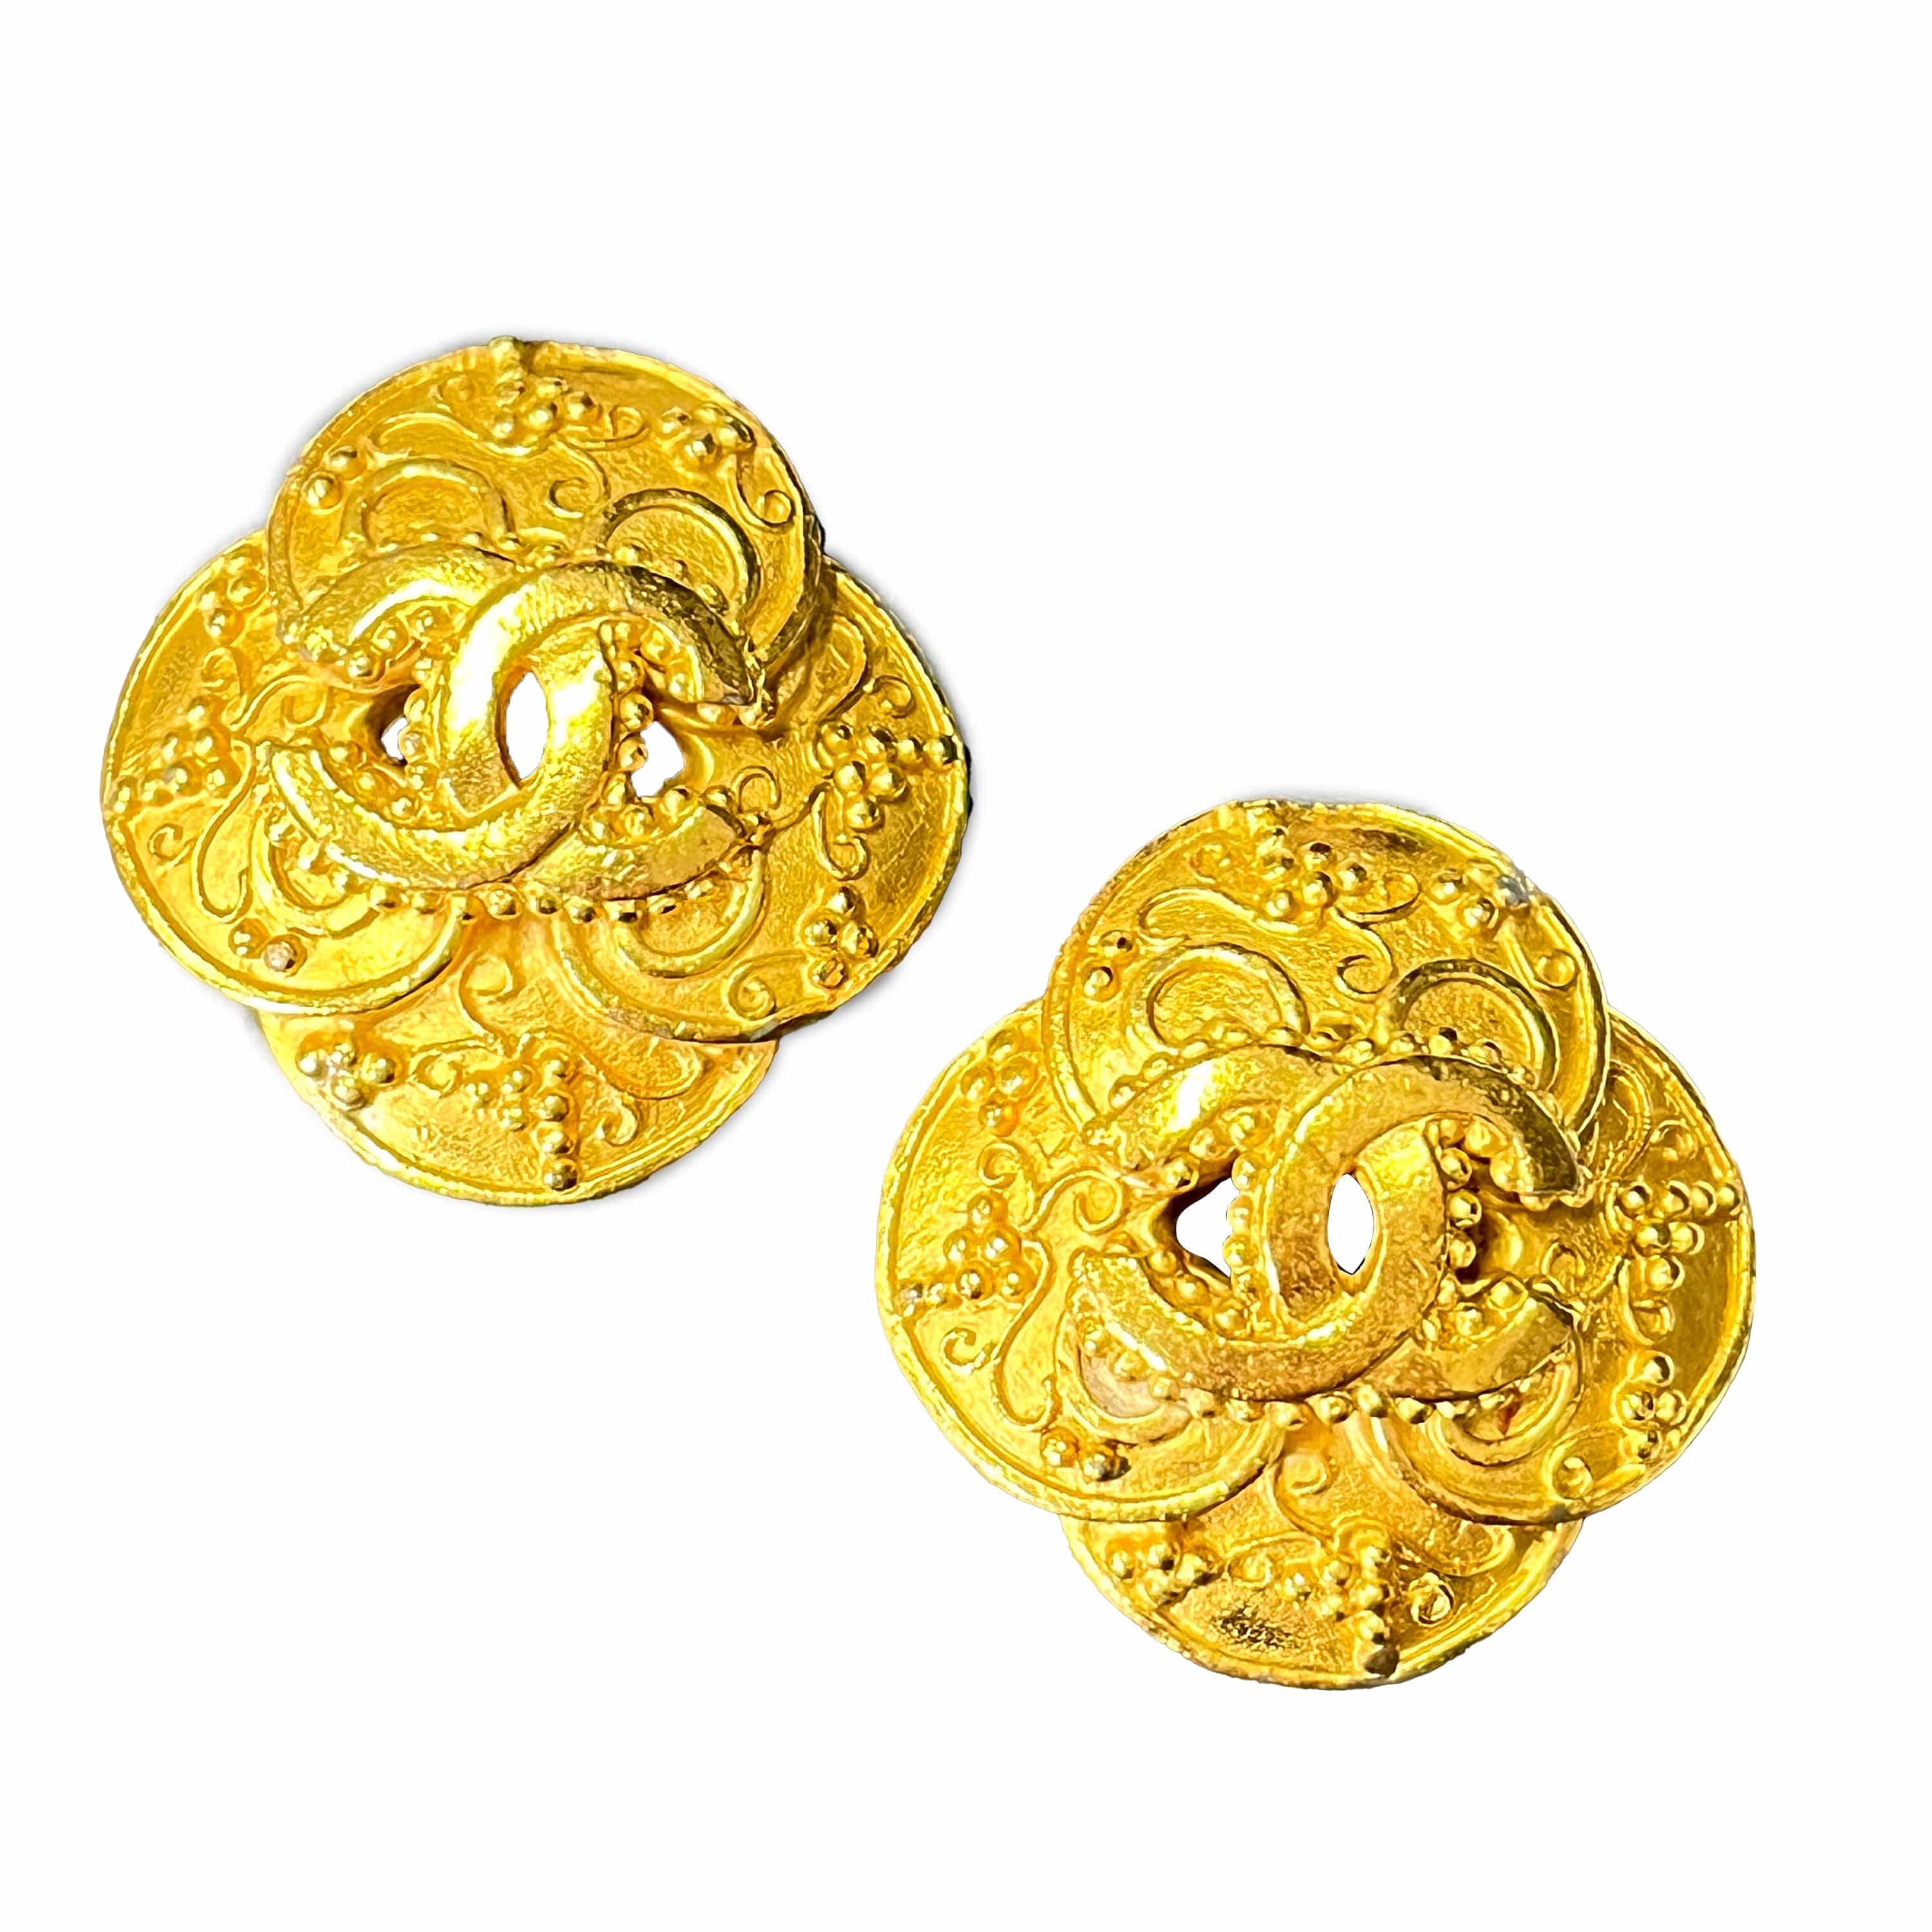 Chanel CHANEL VINTAGE EARRINGS COCOMARK CLOVER MOTIF ACCESSORY 96A 90210928